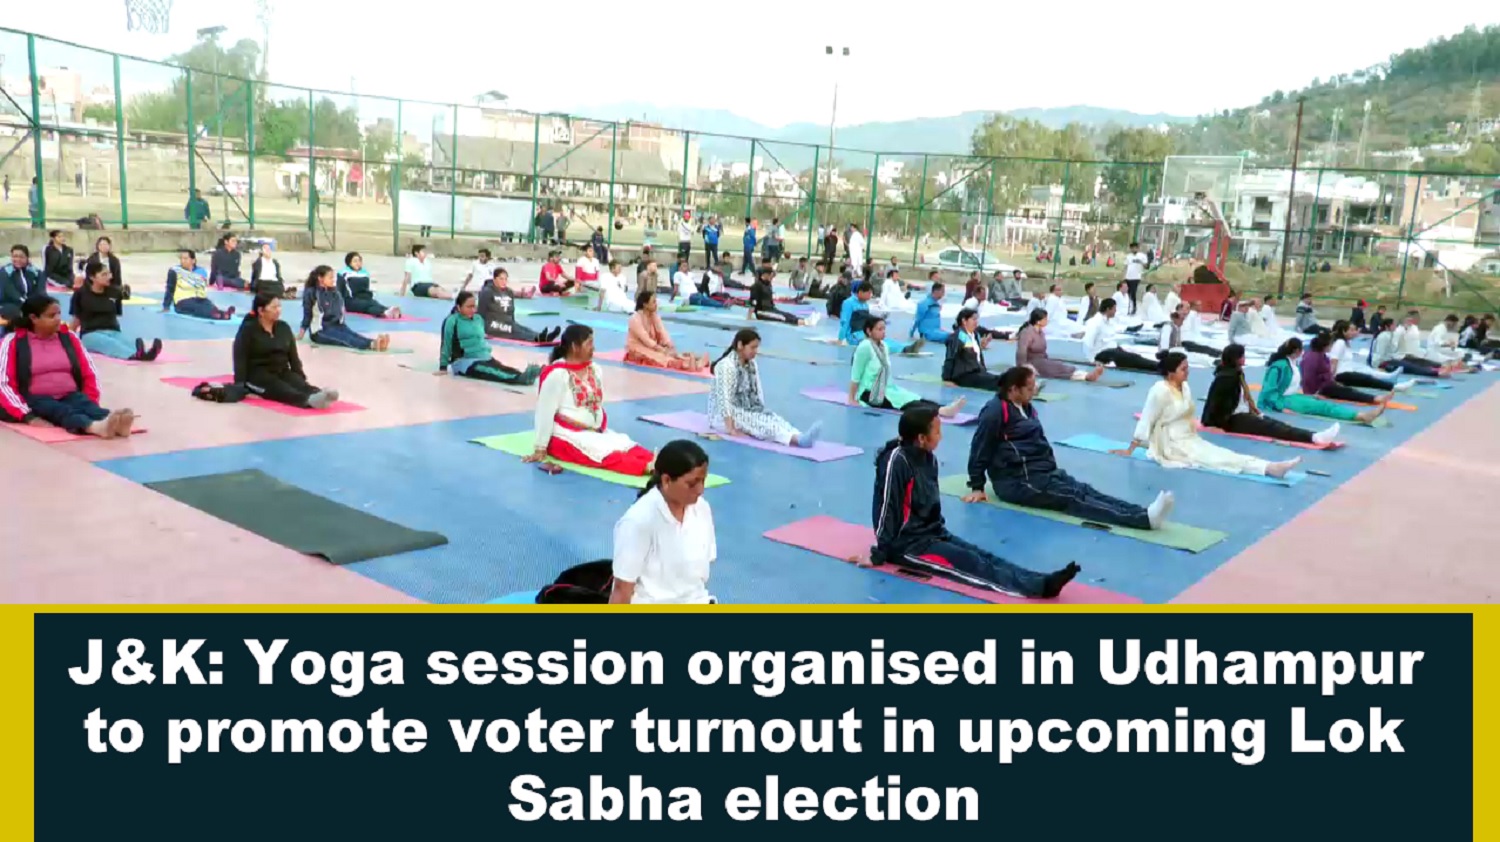 J&K: Yoga session organised to promote voter turnout in upcoming Lok Sabha election in Udhampur